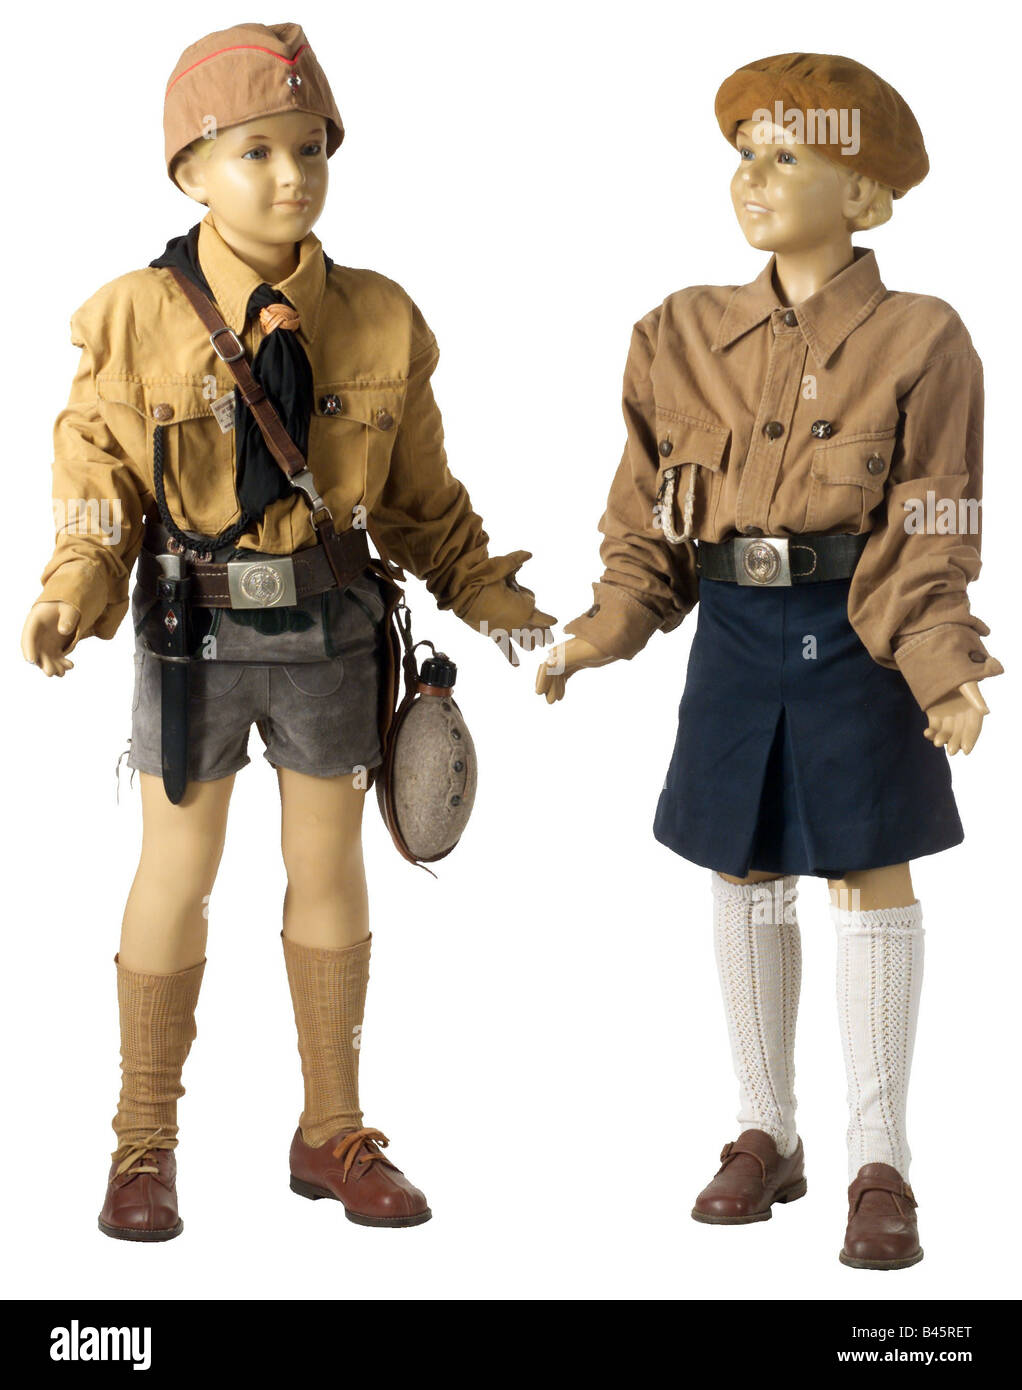 Nazism/National Socialism, organisations, Hitler Youth & League of German Girls, dolls with uniforms, 1930s, 30s, Nazi Germany, Third Reich, , Stock Photo